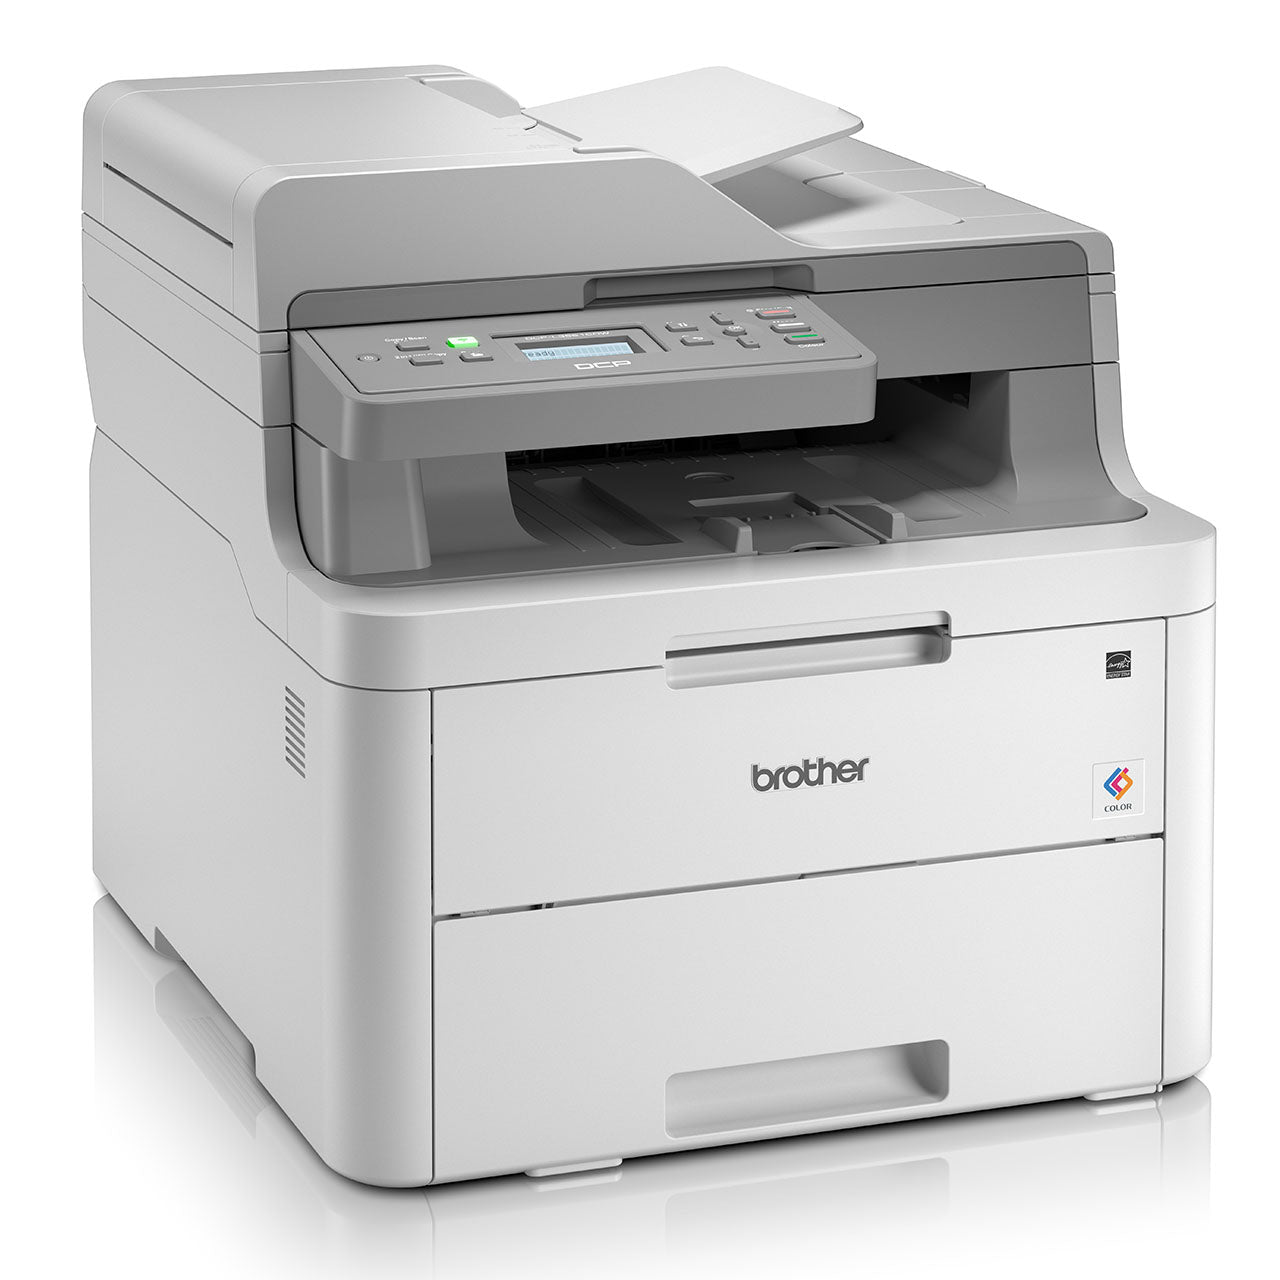 Brother DCP-L3551CDW Colour LED Printer (DCP-L3551CDW)